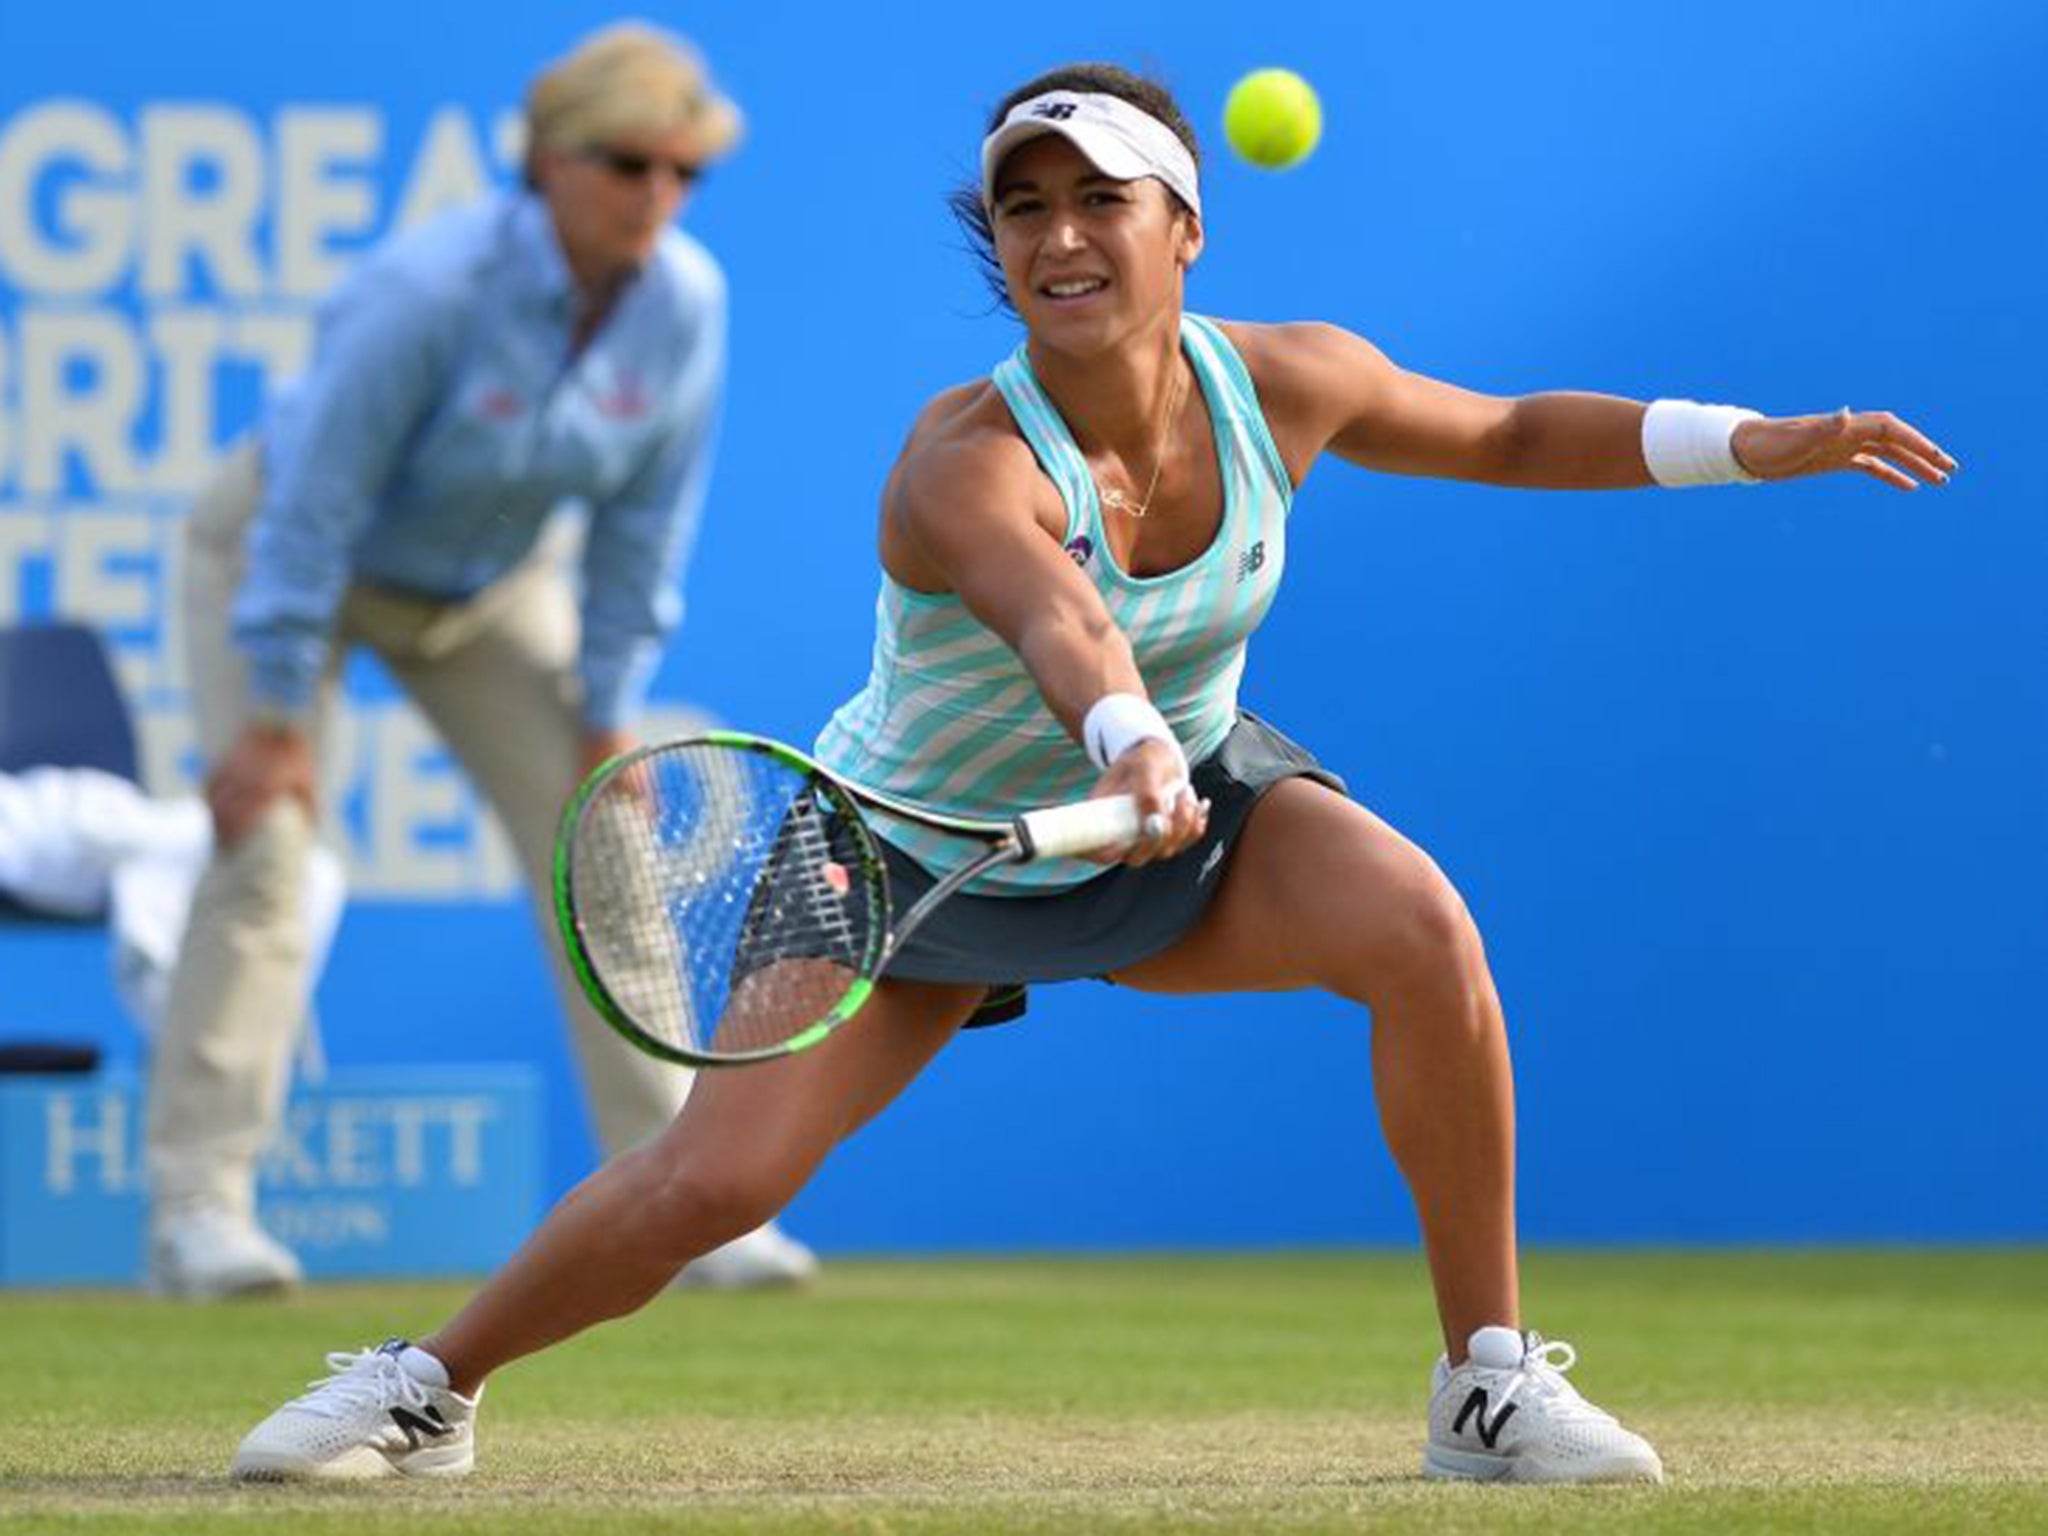 Heather Watson defeated two higher-ranked players before losing to Sloane Stephens in the Aegon International at Eastbourne